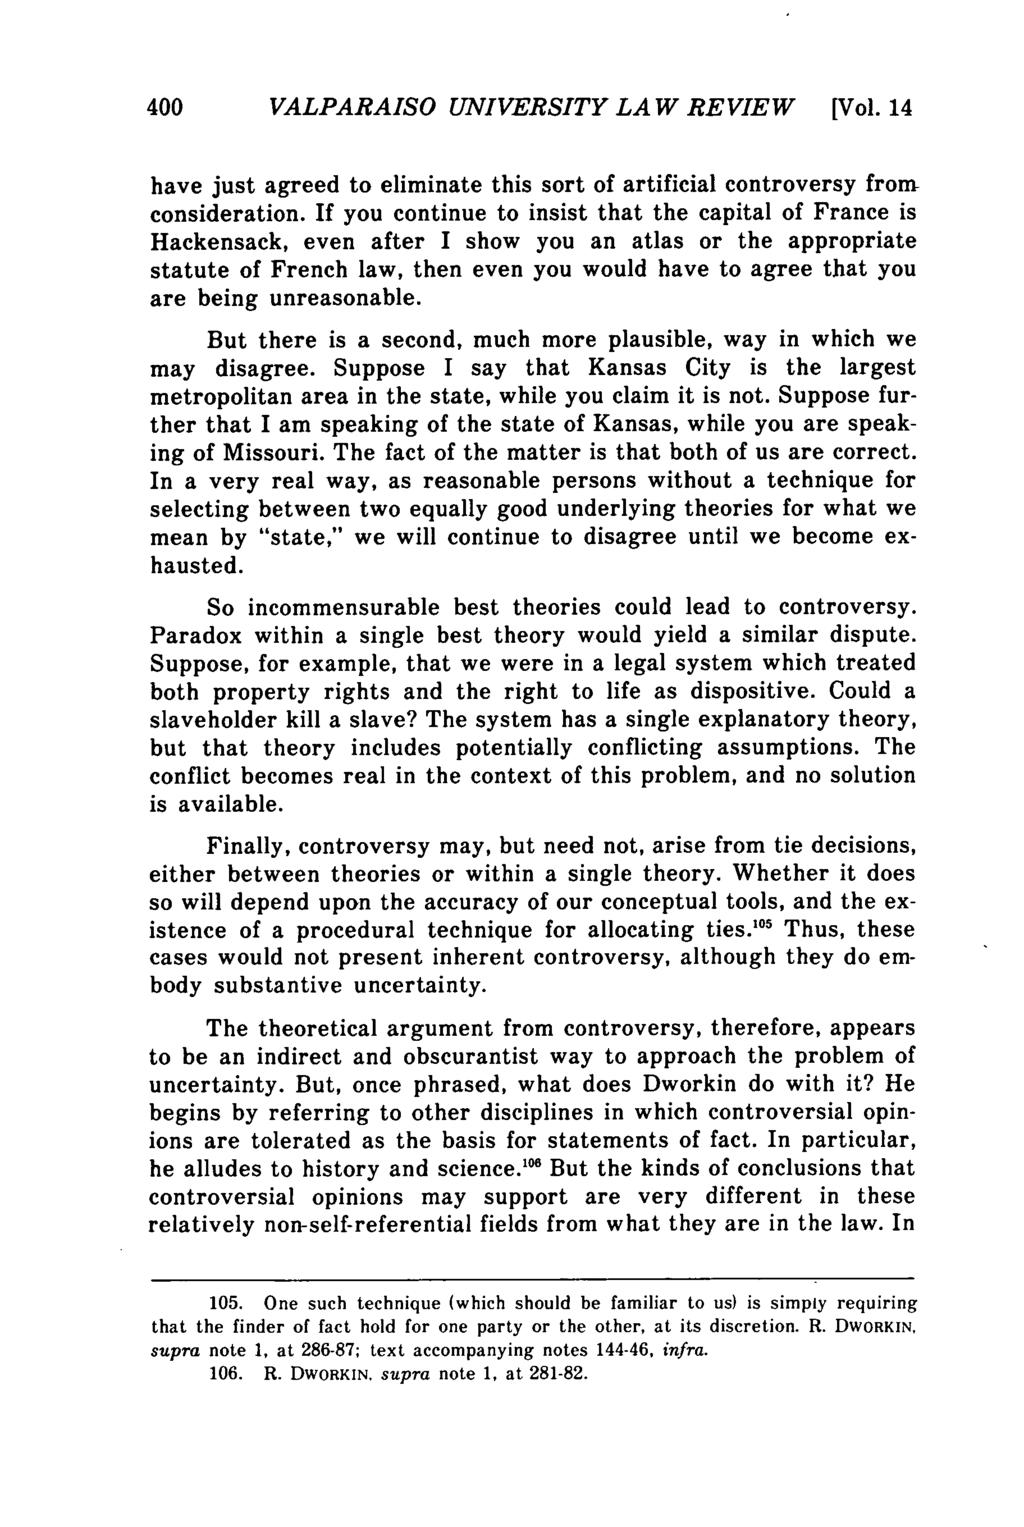 Valparaiso University Law Review, Vol. 14, No. 3 [1980], Art. 1 400 VALPARAISO UNIVERSITY LAW REVIEW [Vol. 14 have just agreed to eliminate this sort of artificial controversy from consideration.